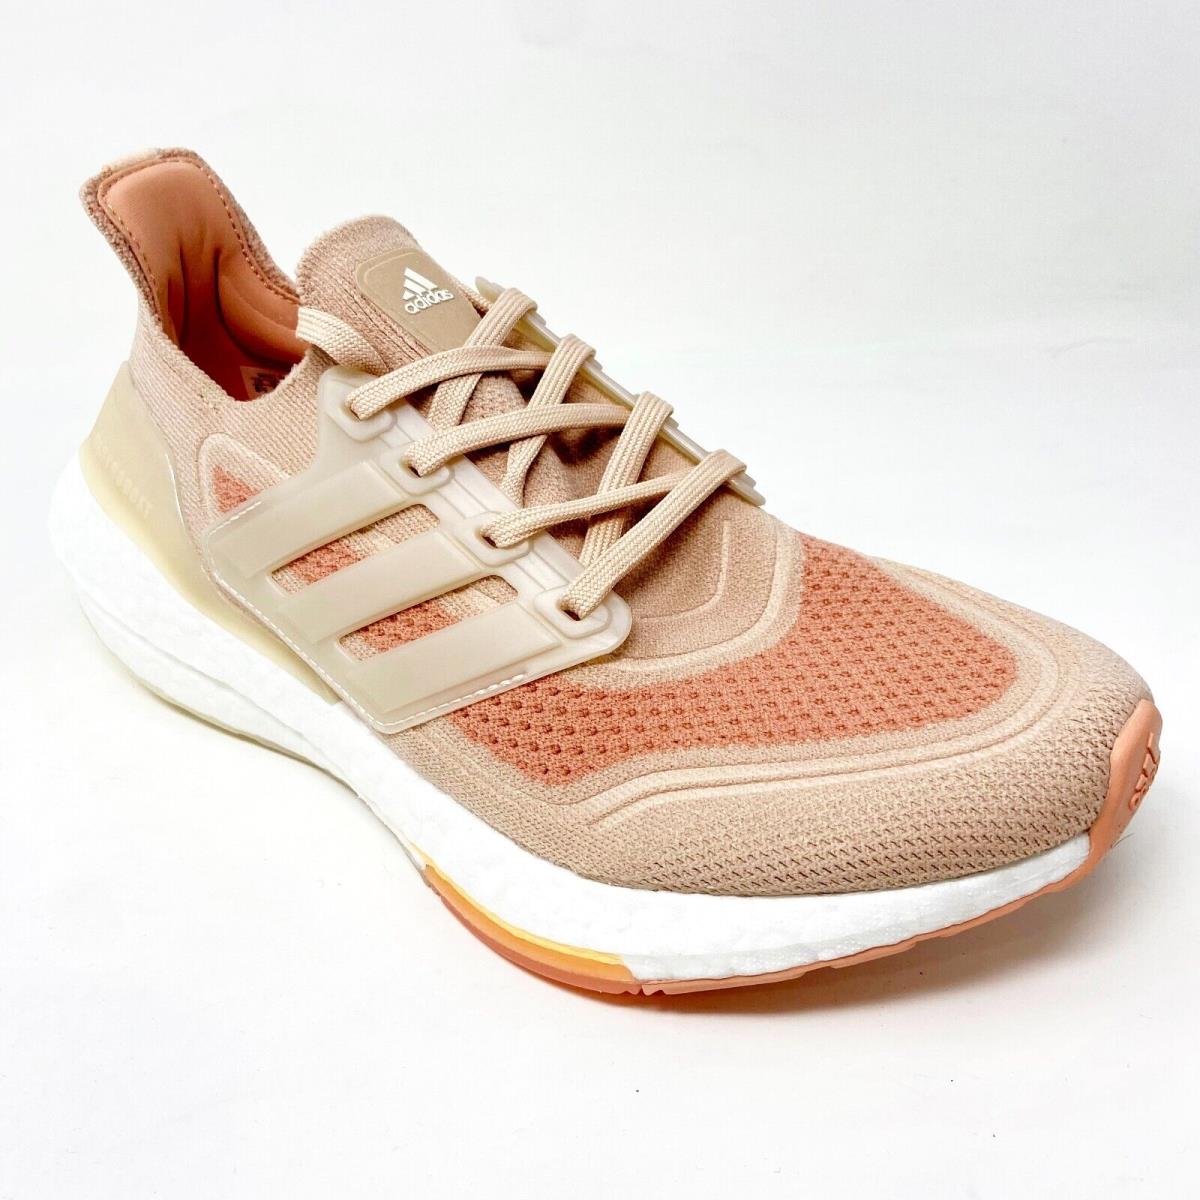 Adidas shoes Ultraboost - Pink 0